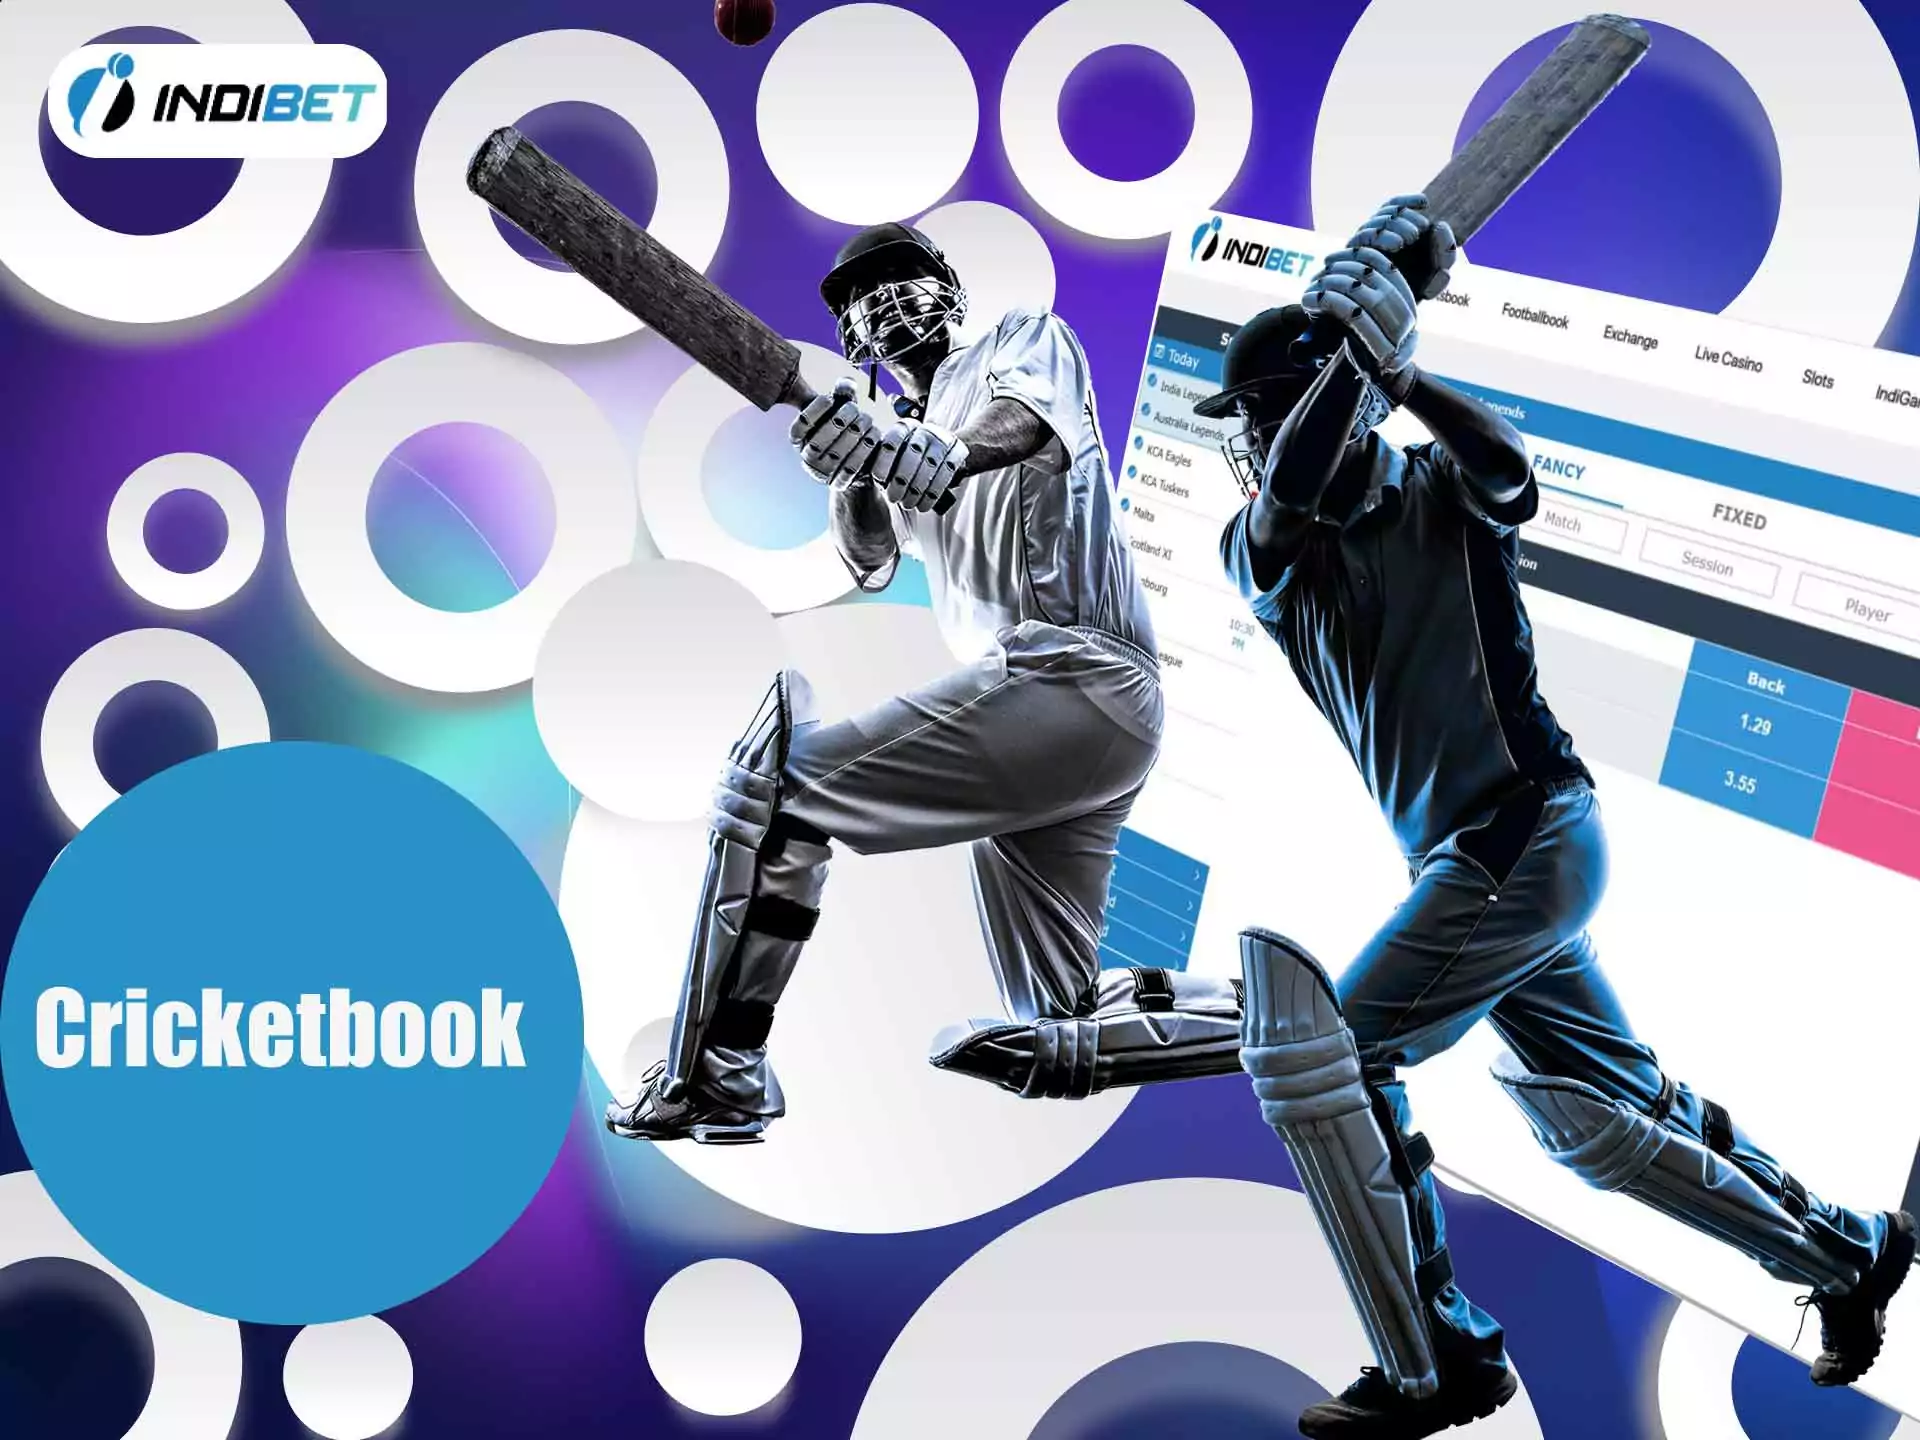 Place bets on the cricket events in the Indibet sportsbook.